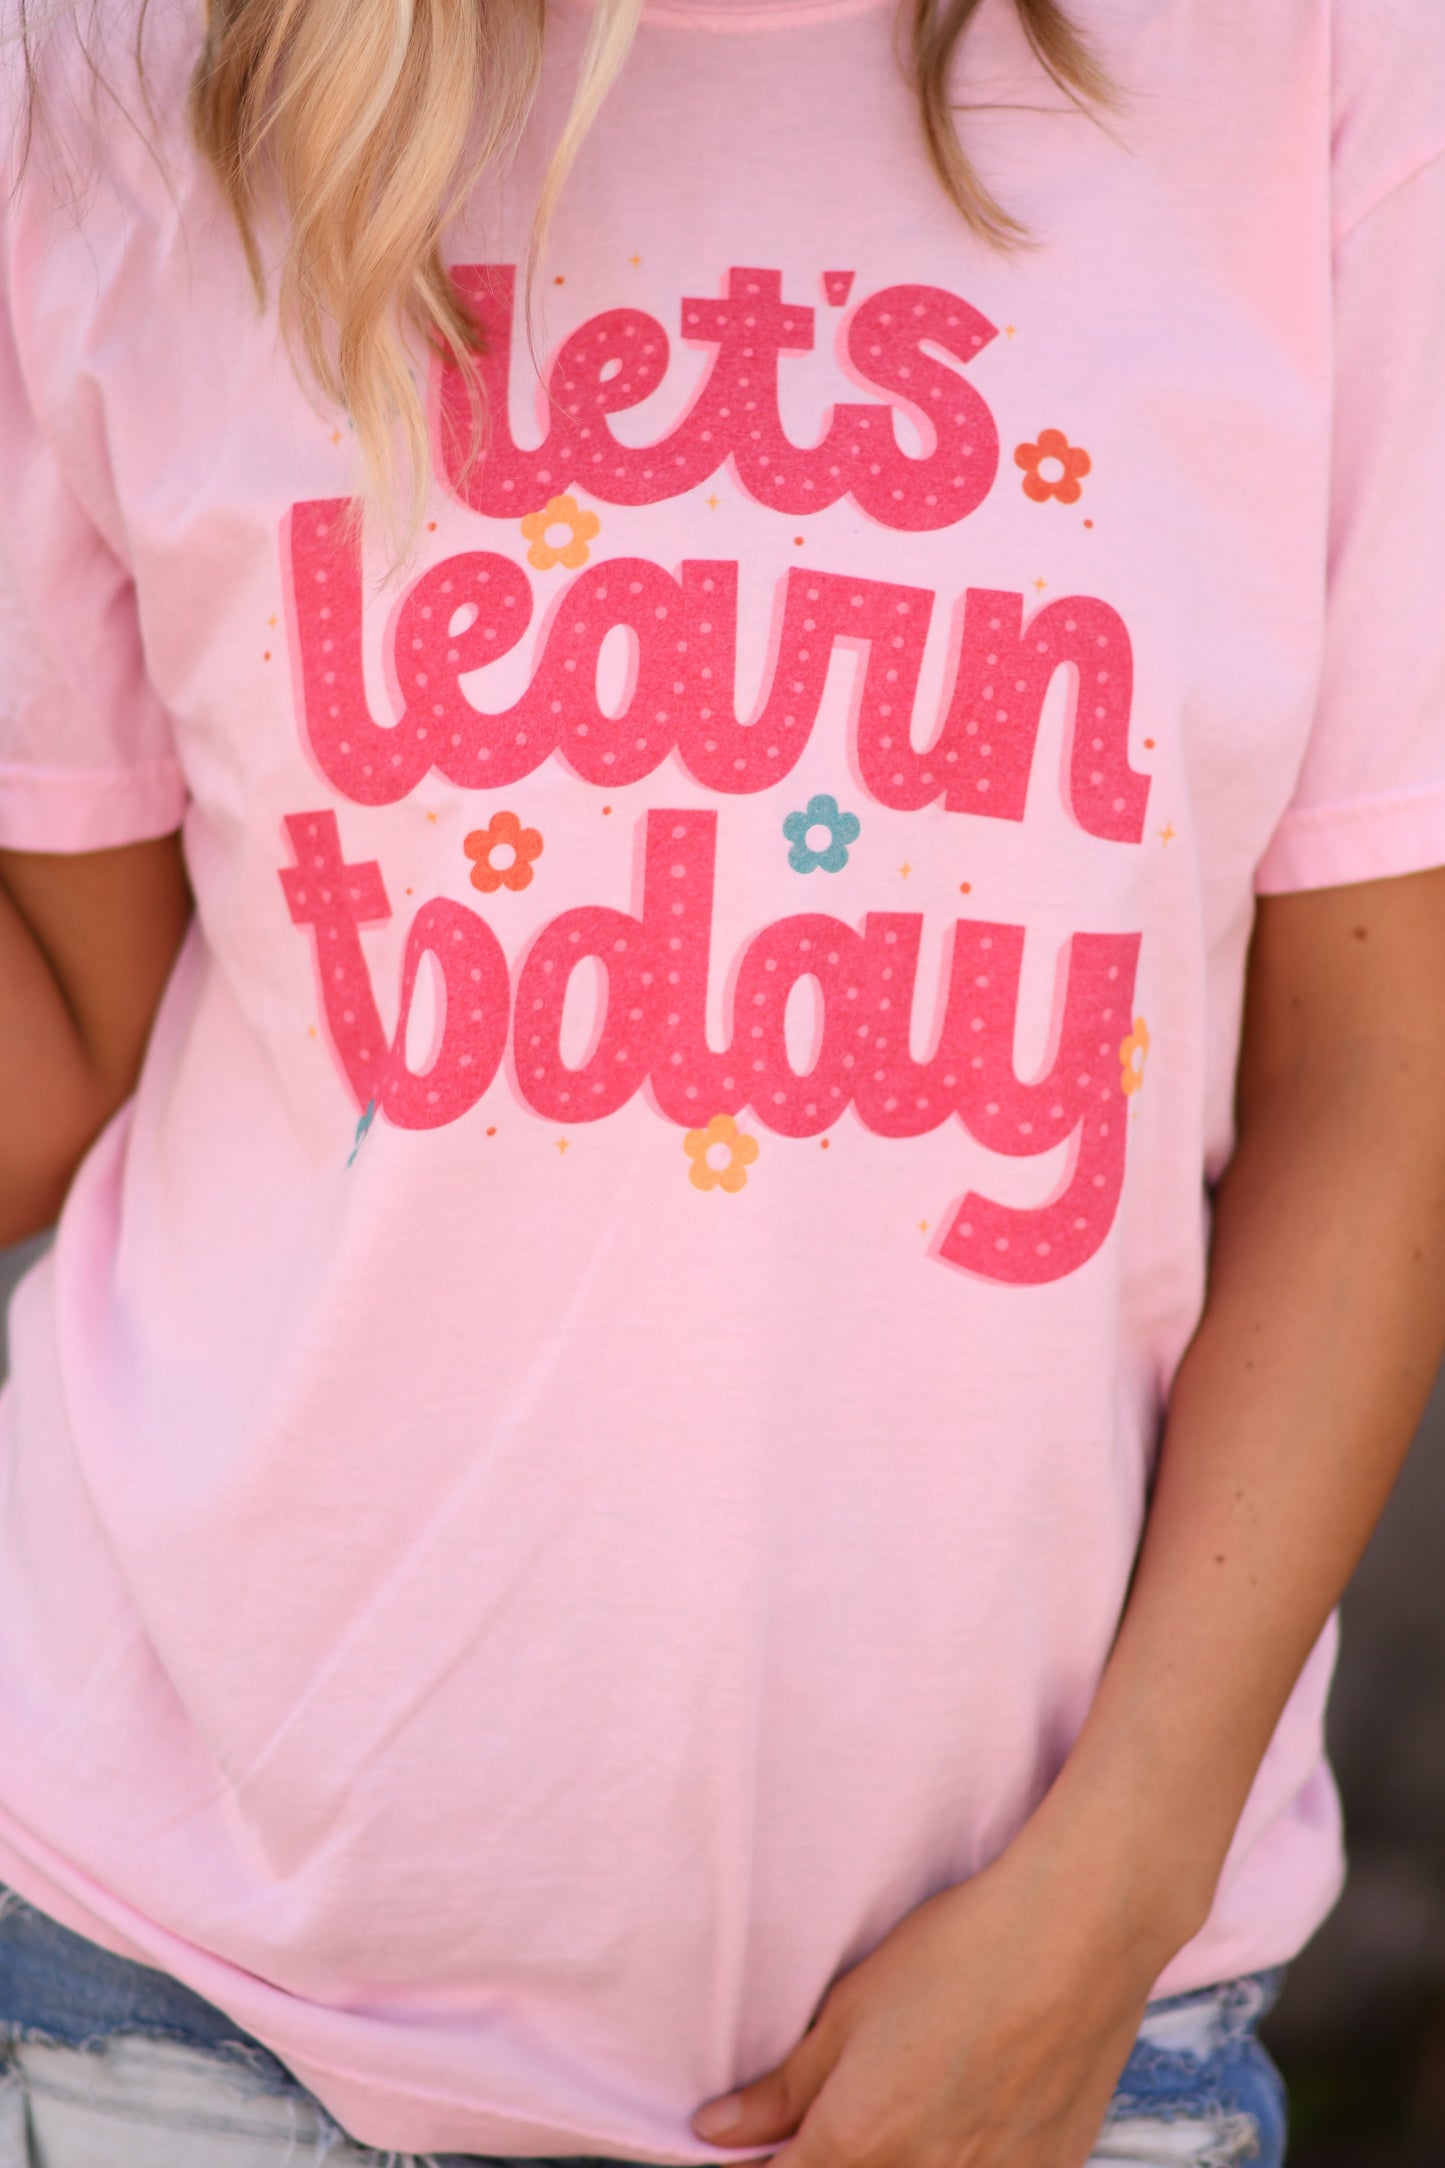 Let’s Learn Today tee